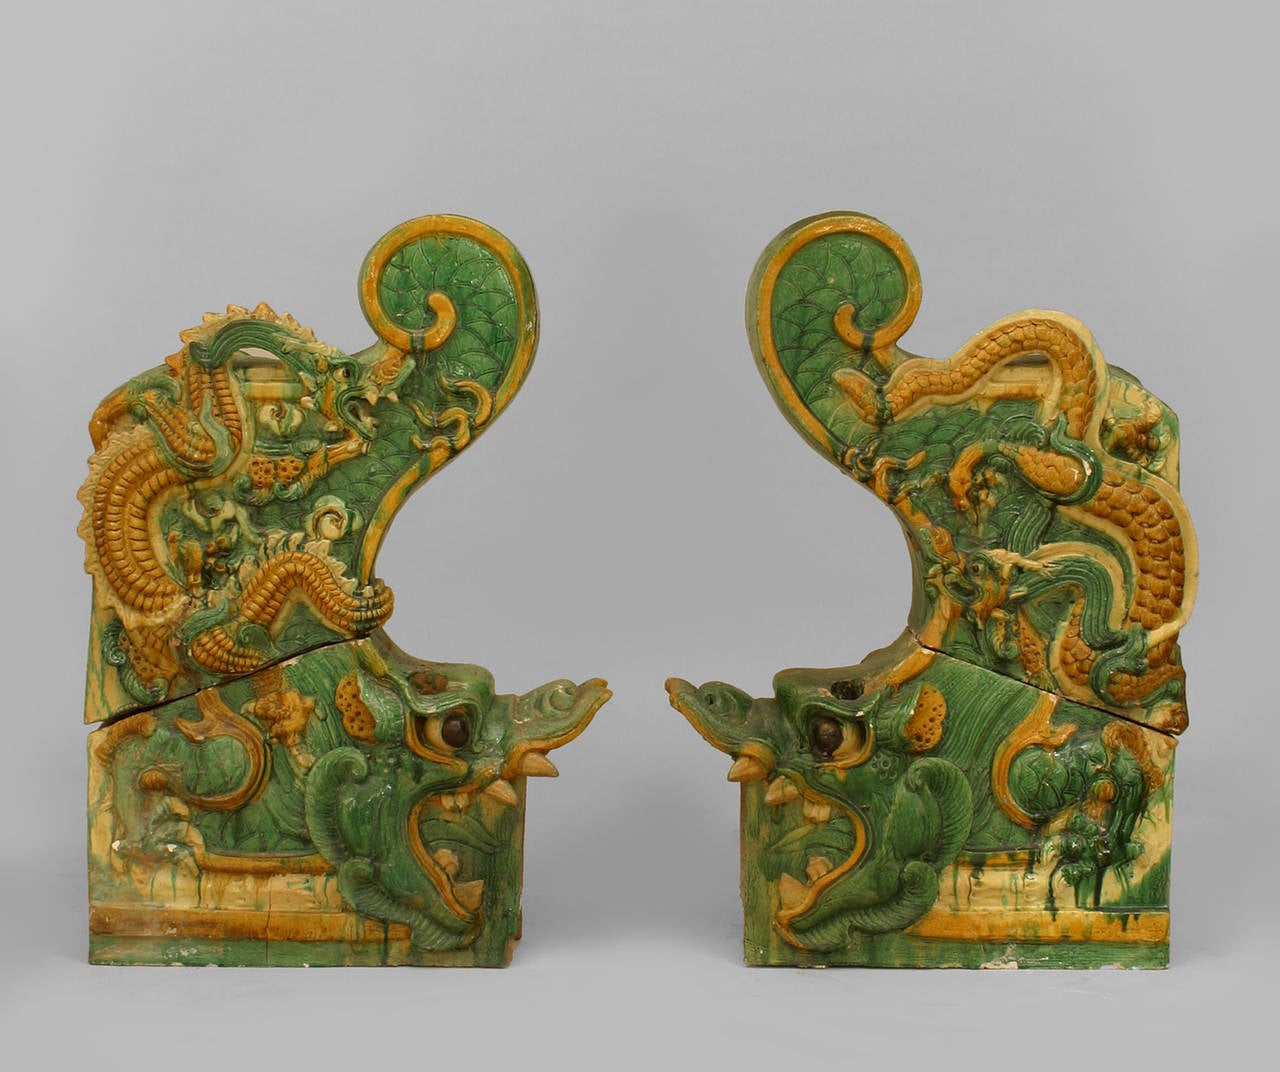 Pair of Chinese Ming dynasty, circa 1368-1644 C.E. green and yellow.
Glazed terracotta dragon left and right roof tiles, each composed of two pieces.